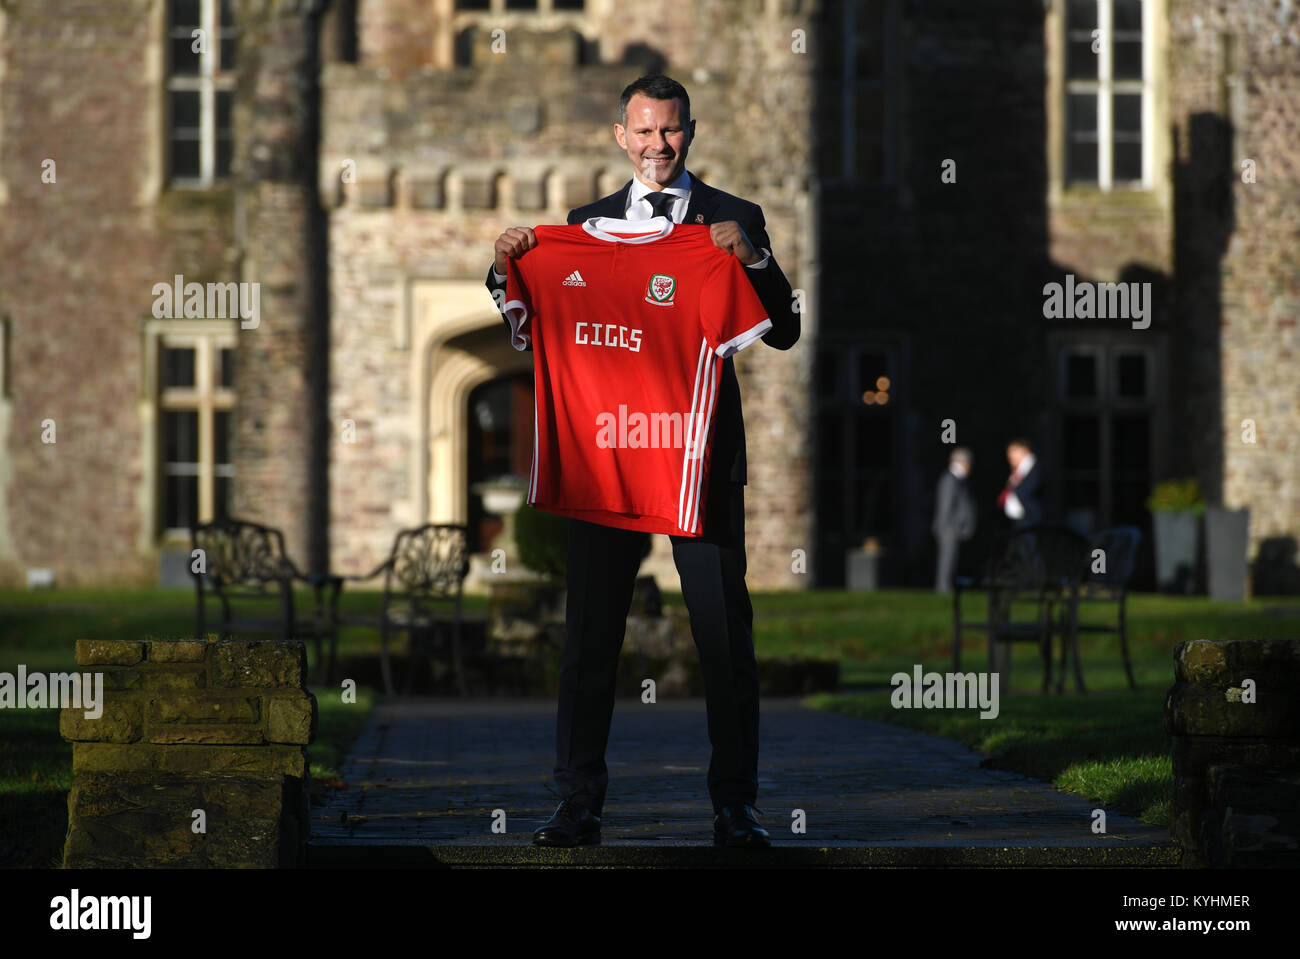 New Wales manager Ryan Giggs poses with a Wales shirt after a press conference at Hensol Caste, Vale Resort, Hensol. Stock Photo